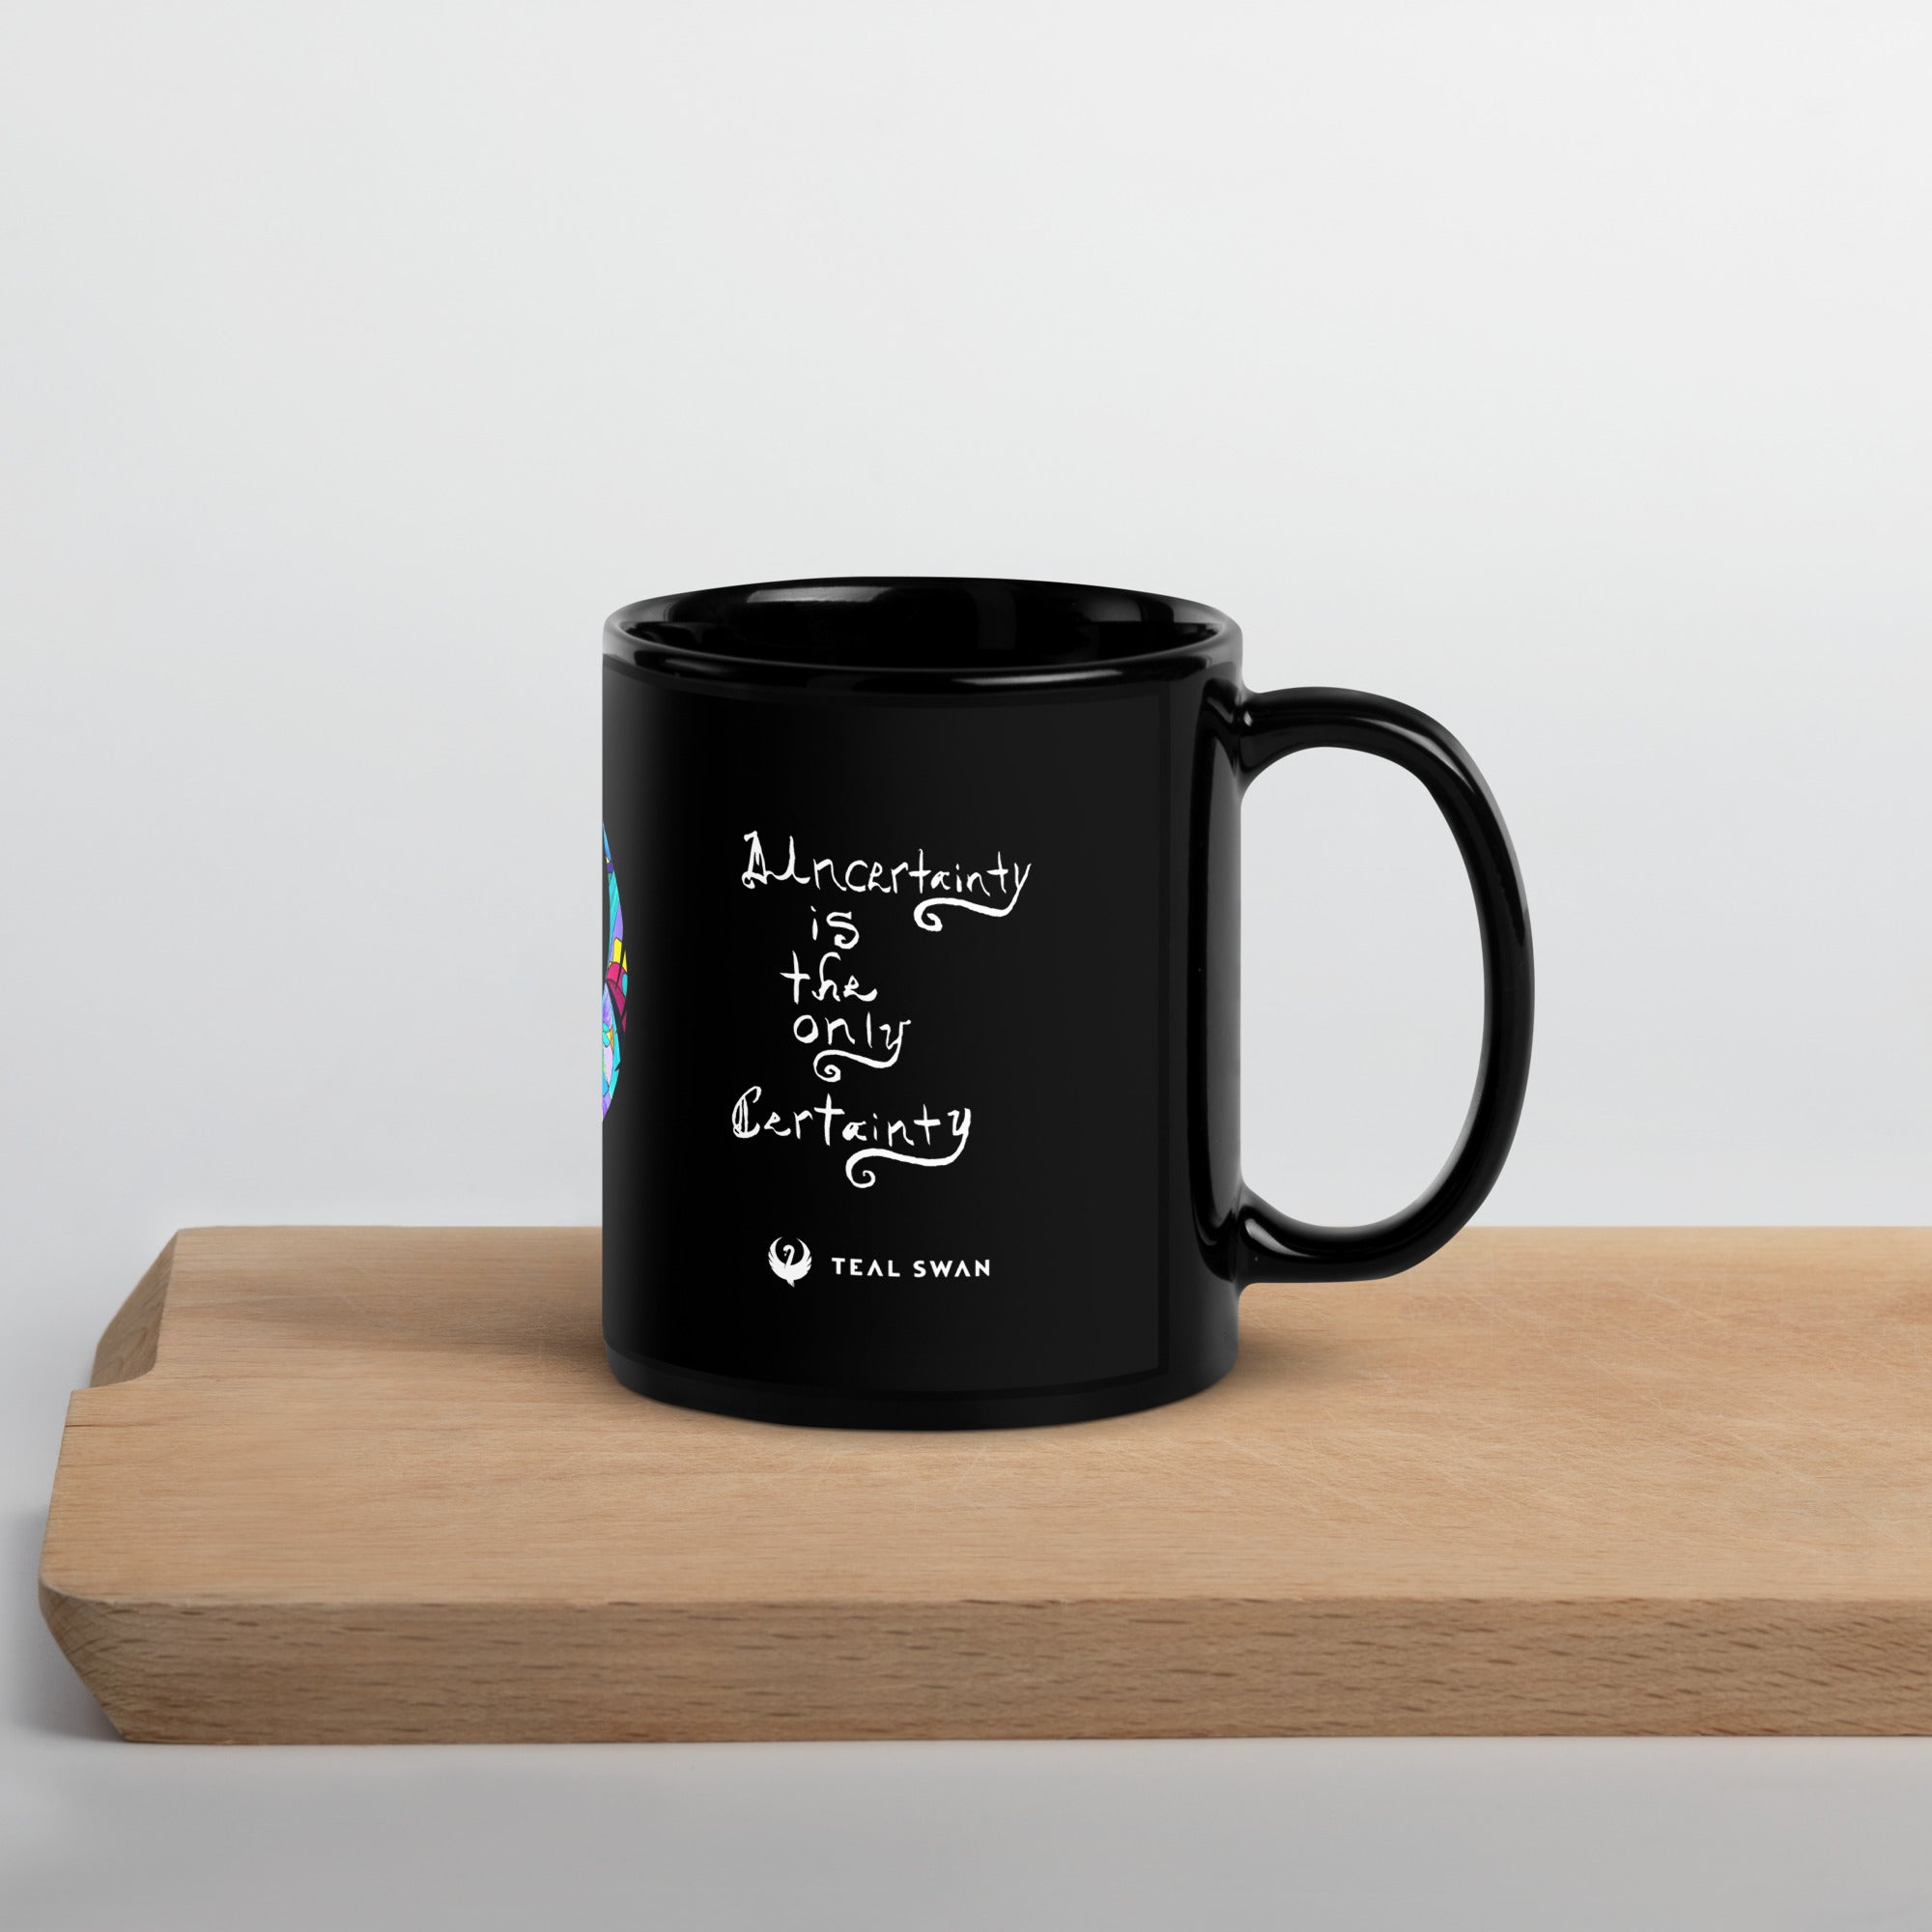 we-offer-the-best-prices-on-the-best-of-uncertainty-quote-black-glossy-mug-supply_0.jpg